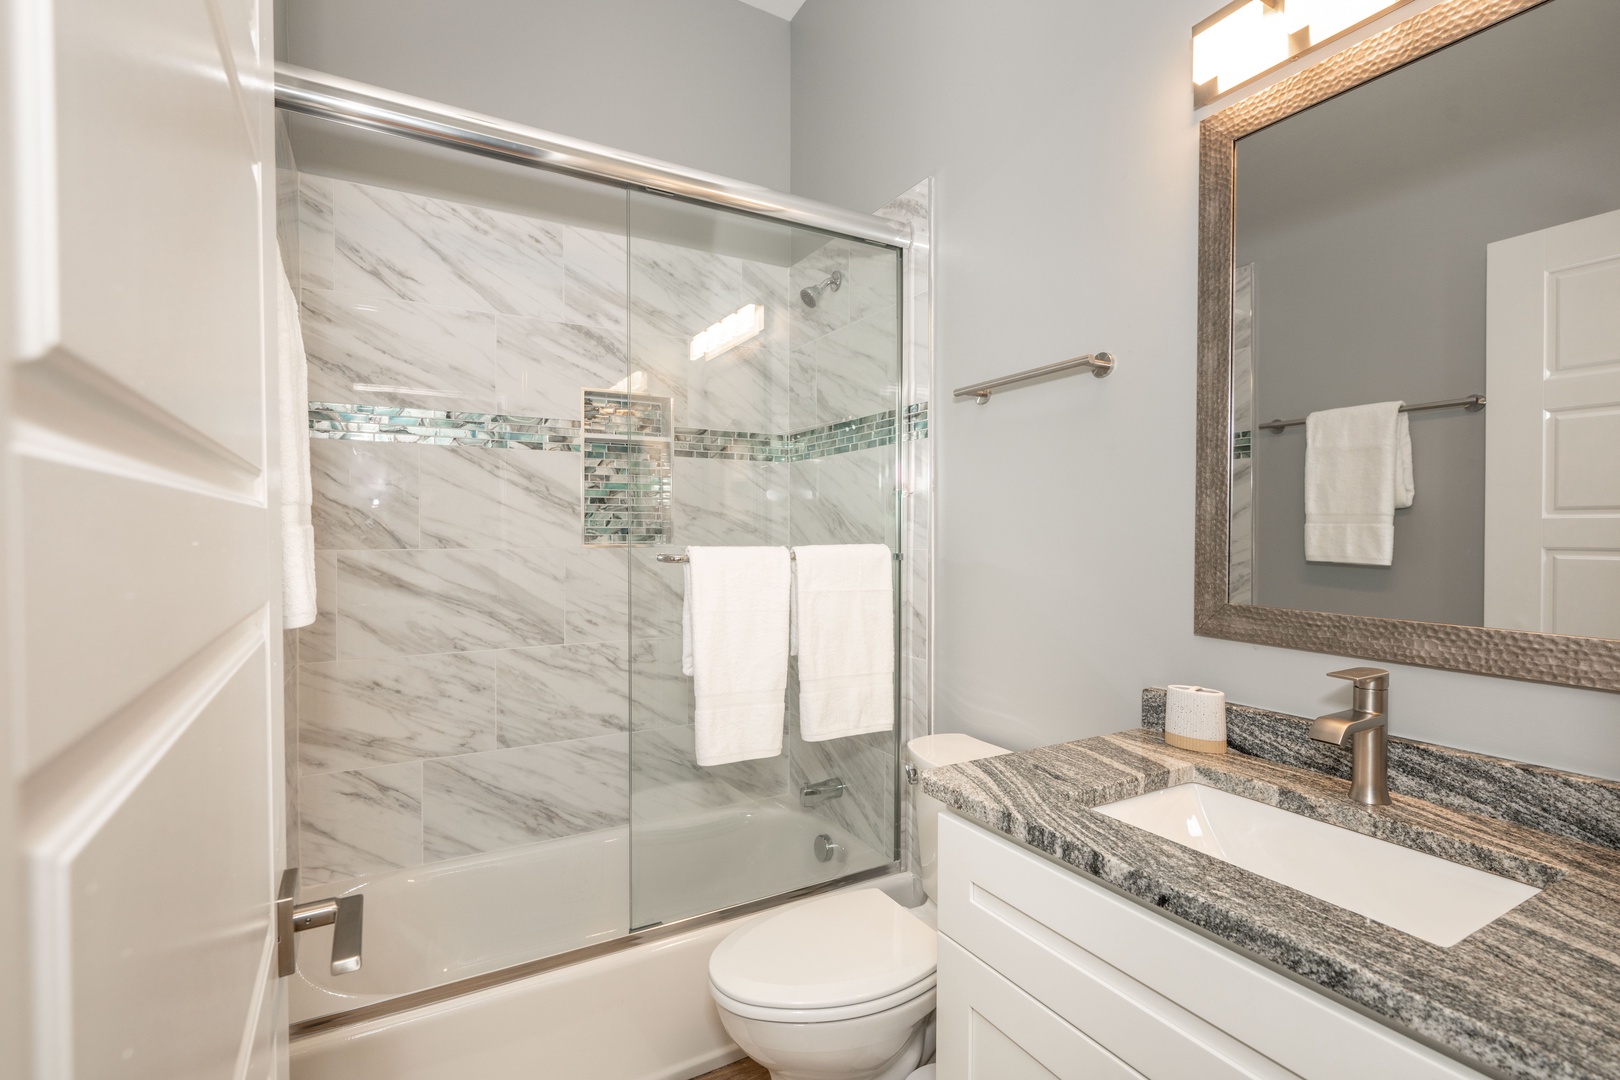 The chic full bathroom offers a single vanity & shower/tub combo